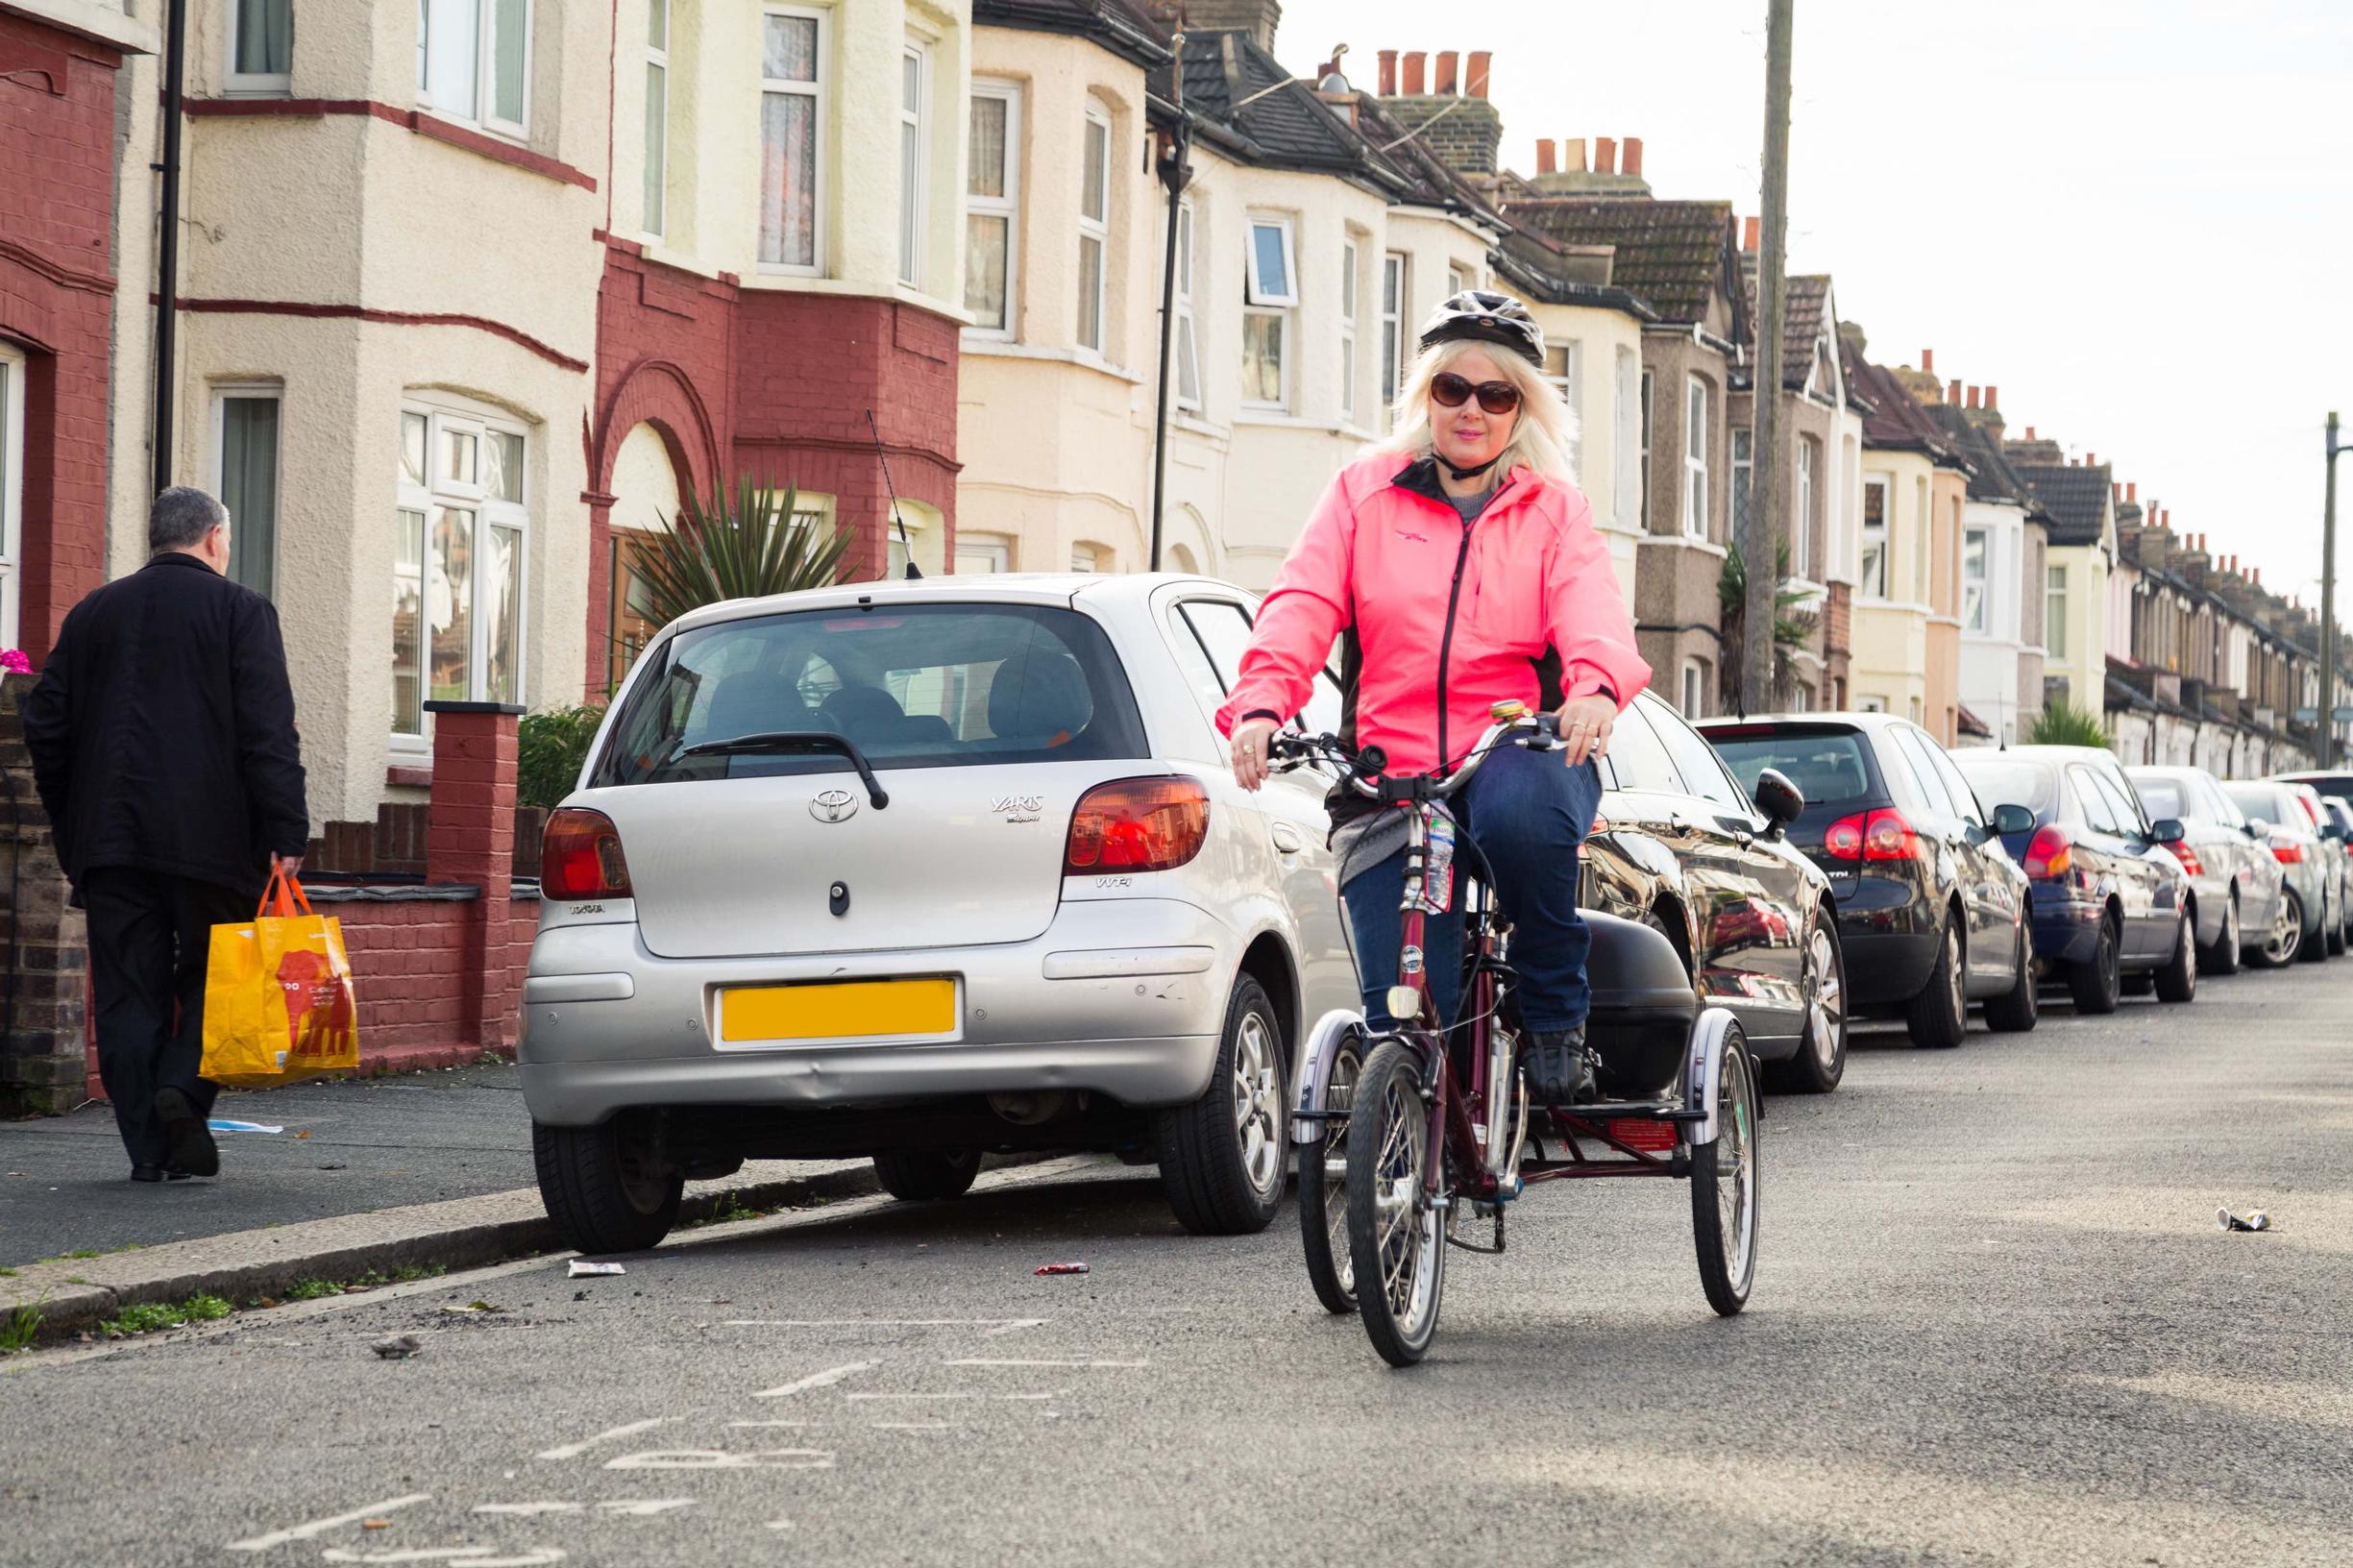 Cycling infrastructure design standards should meet the needs of those using adapted cycles including tricycles, tandems and cargo bikes, says Sustrans/Arup report (Image: Wheels for Wellbeing)